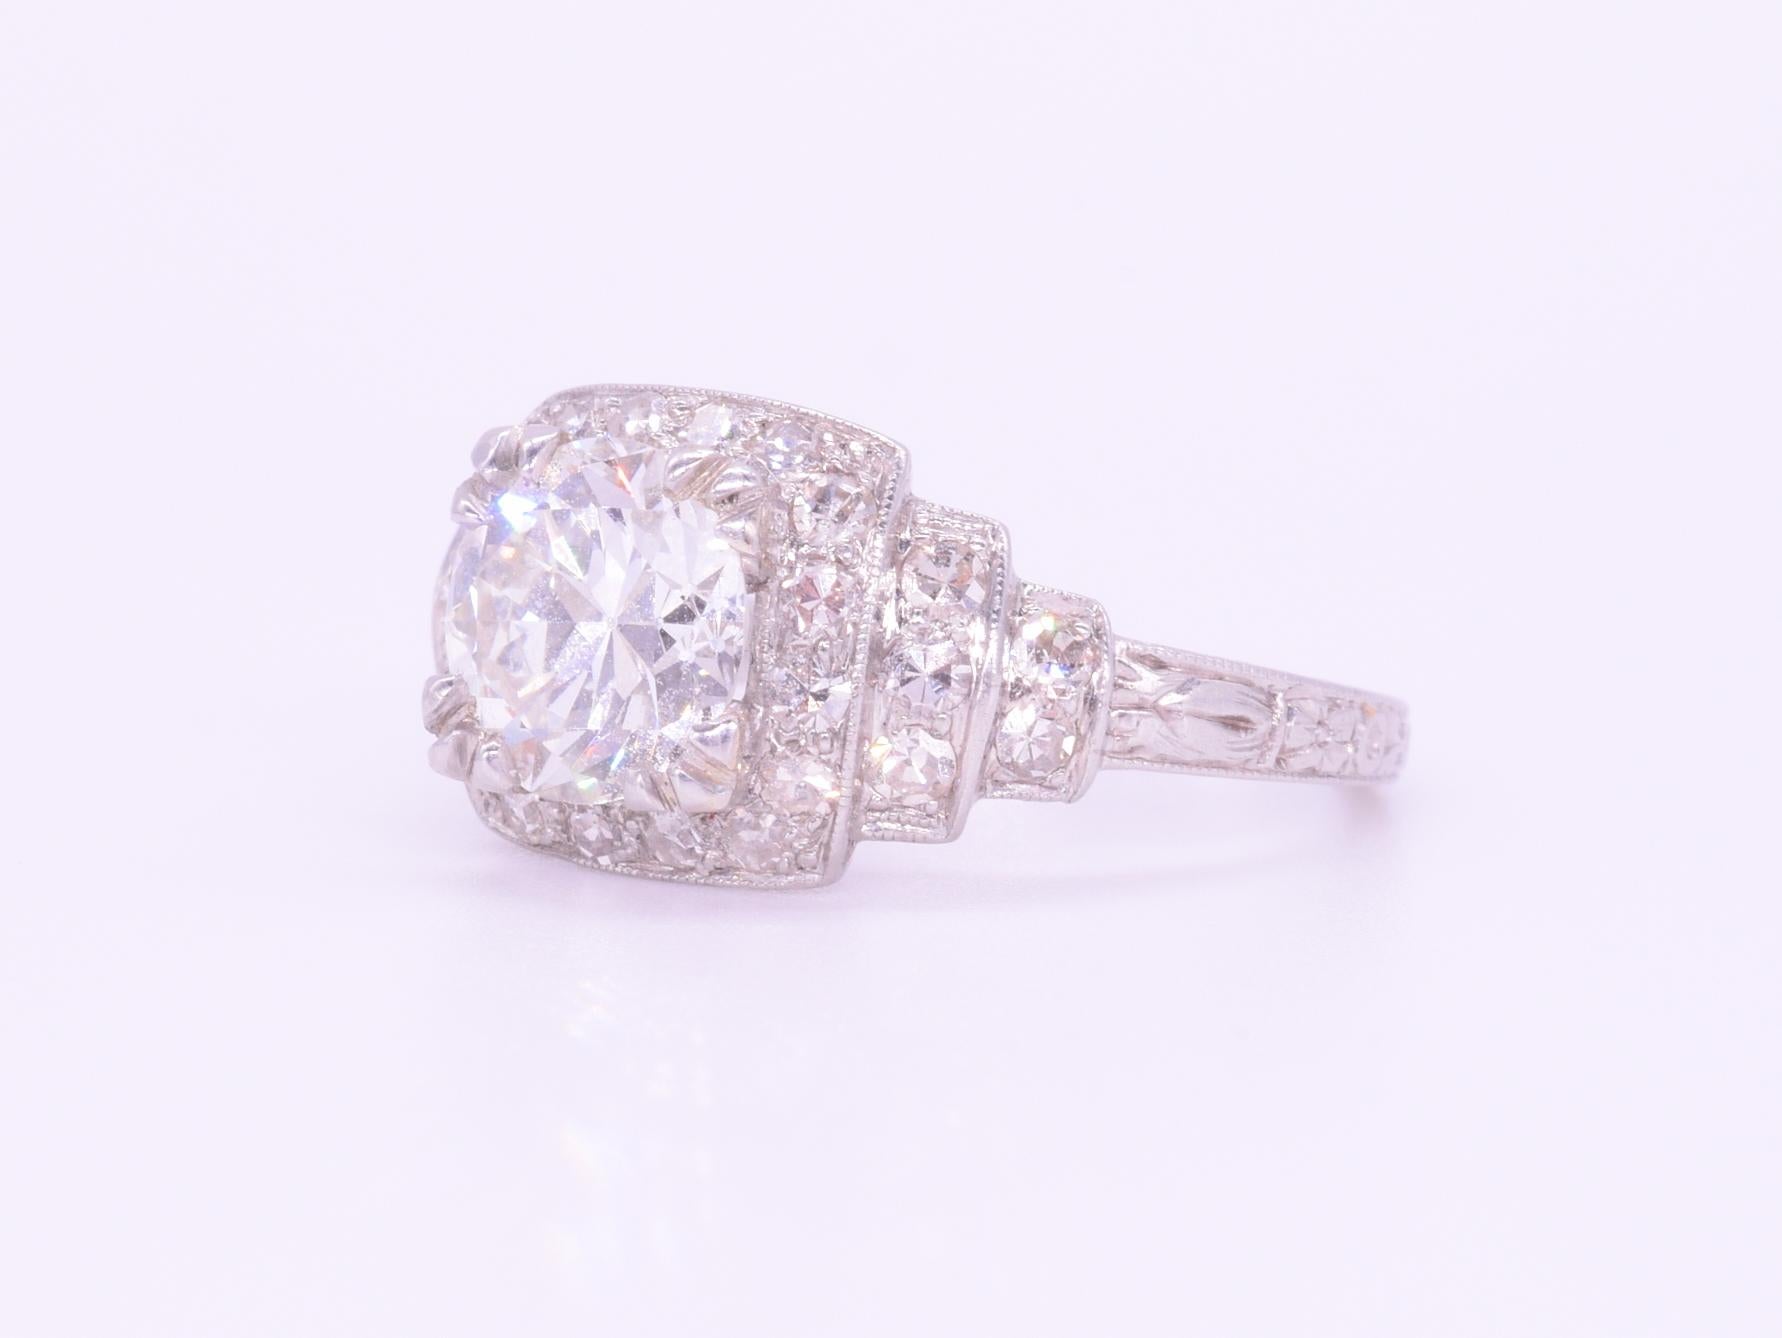 A transitional cut round diamond weighing approximately 1.40cts, of approximately H-I color and VS clarity, is set within a square stepped halo accented with single cut diamonds totaling approximately 0.50ct in a platinum mounting. Ring size